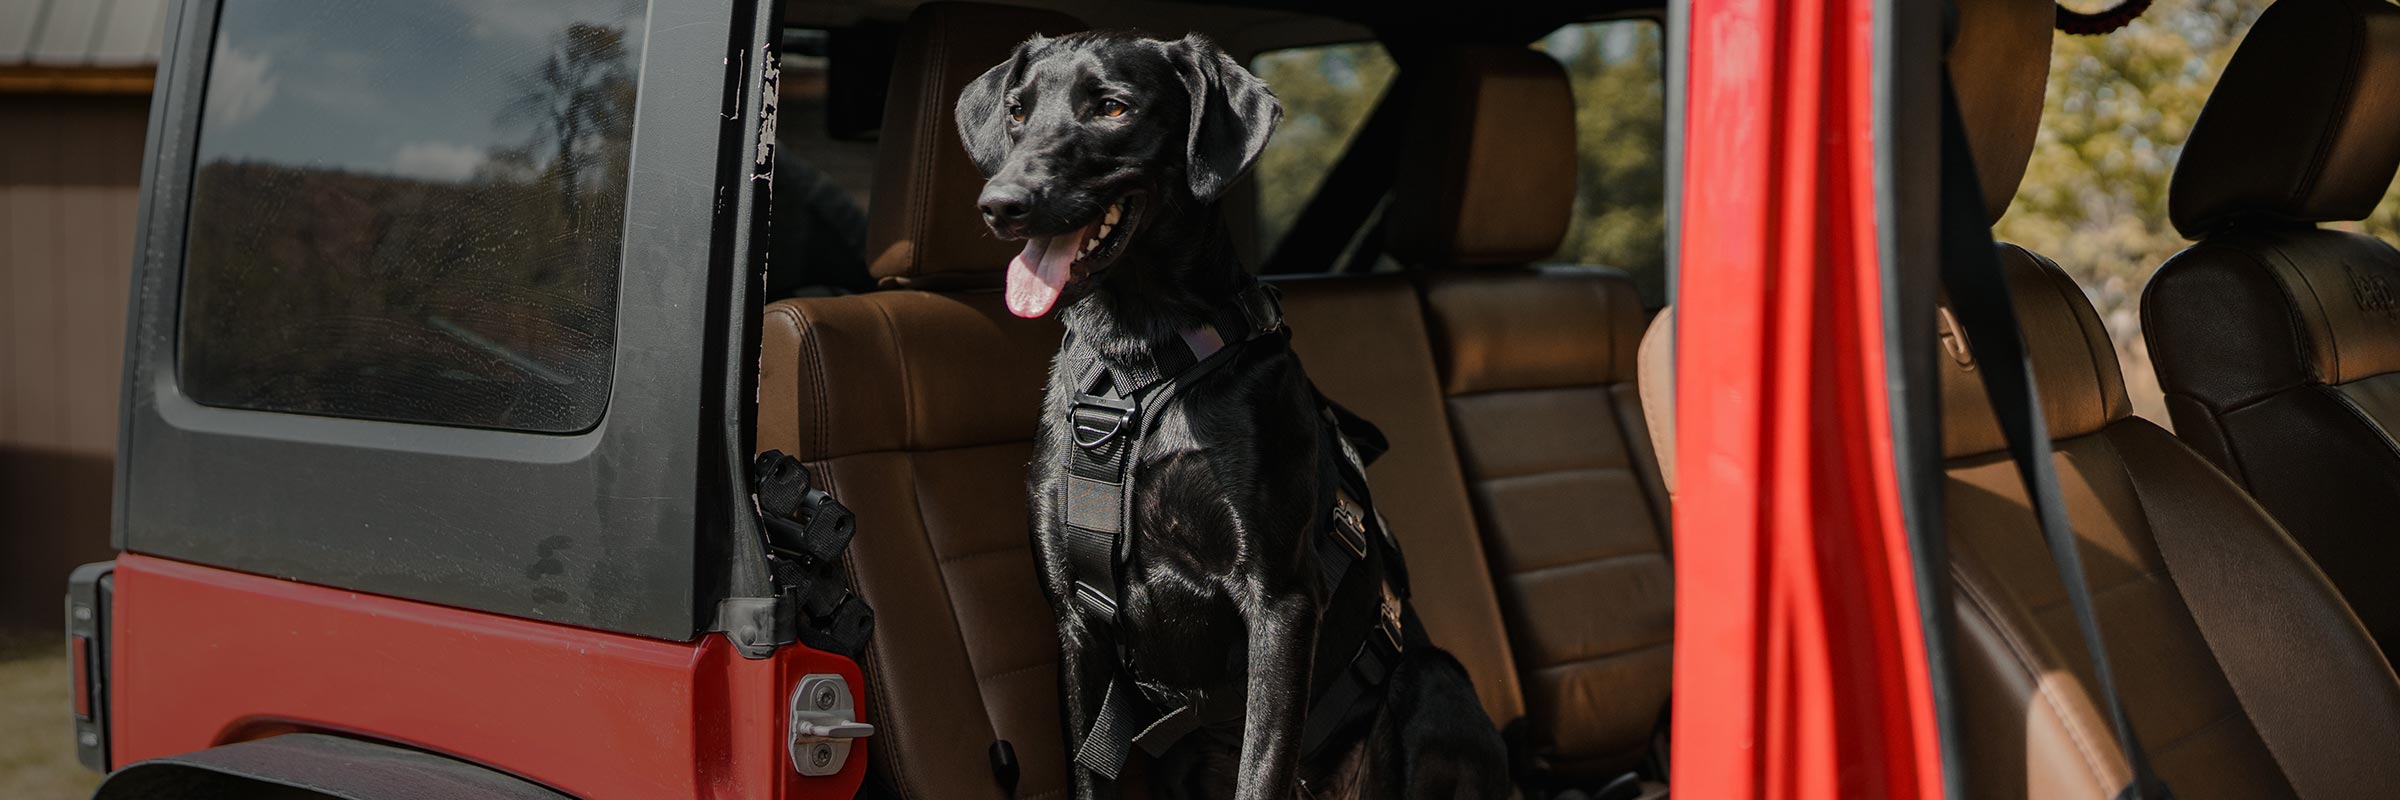 black dog wearing the Ascension extended harness on the backseat of a red jeep